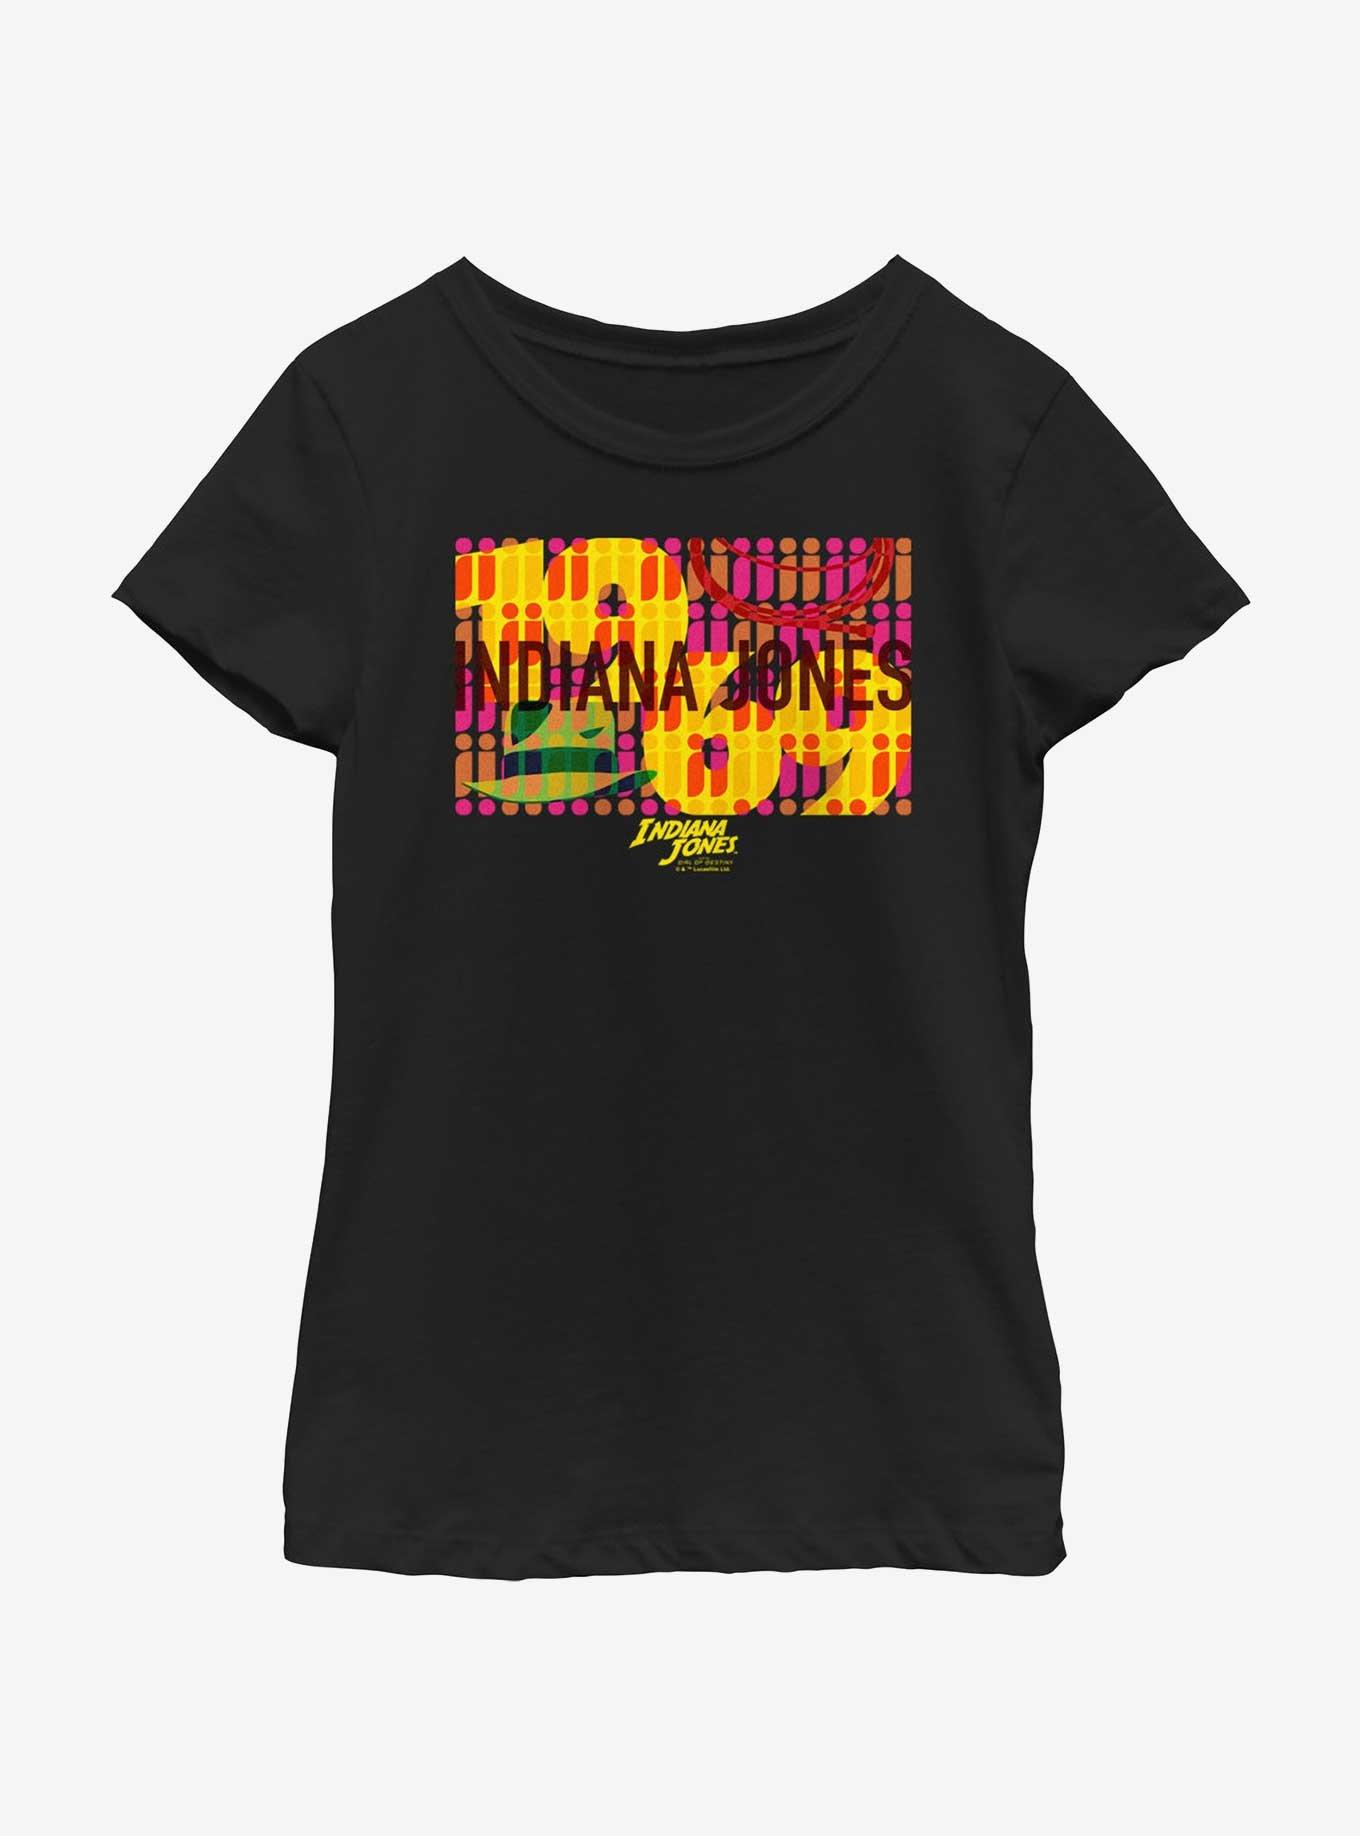 Indiana Jones and the Dial of Destiny Sixties Wallpaper Girls Youth T-Shirt, BLACK, hi-res